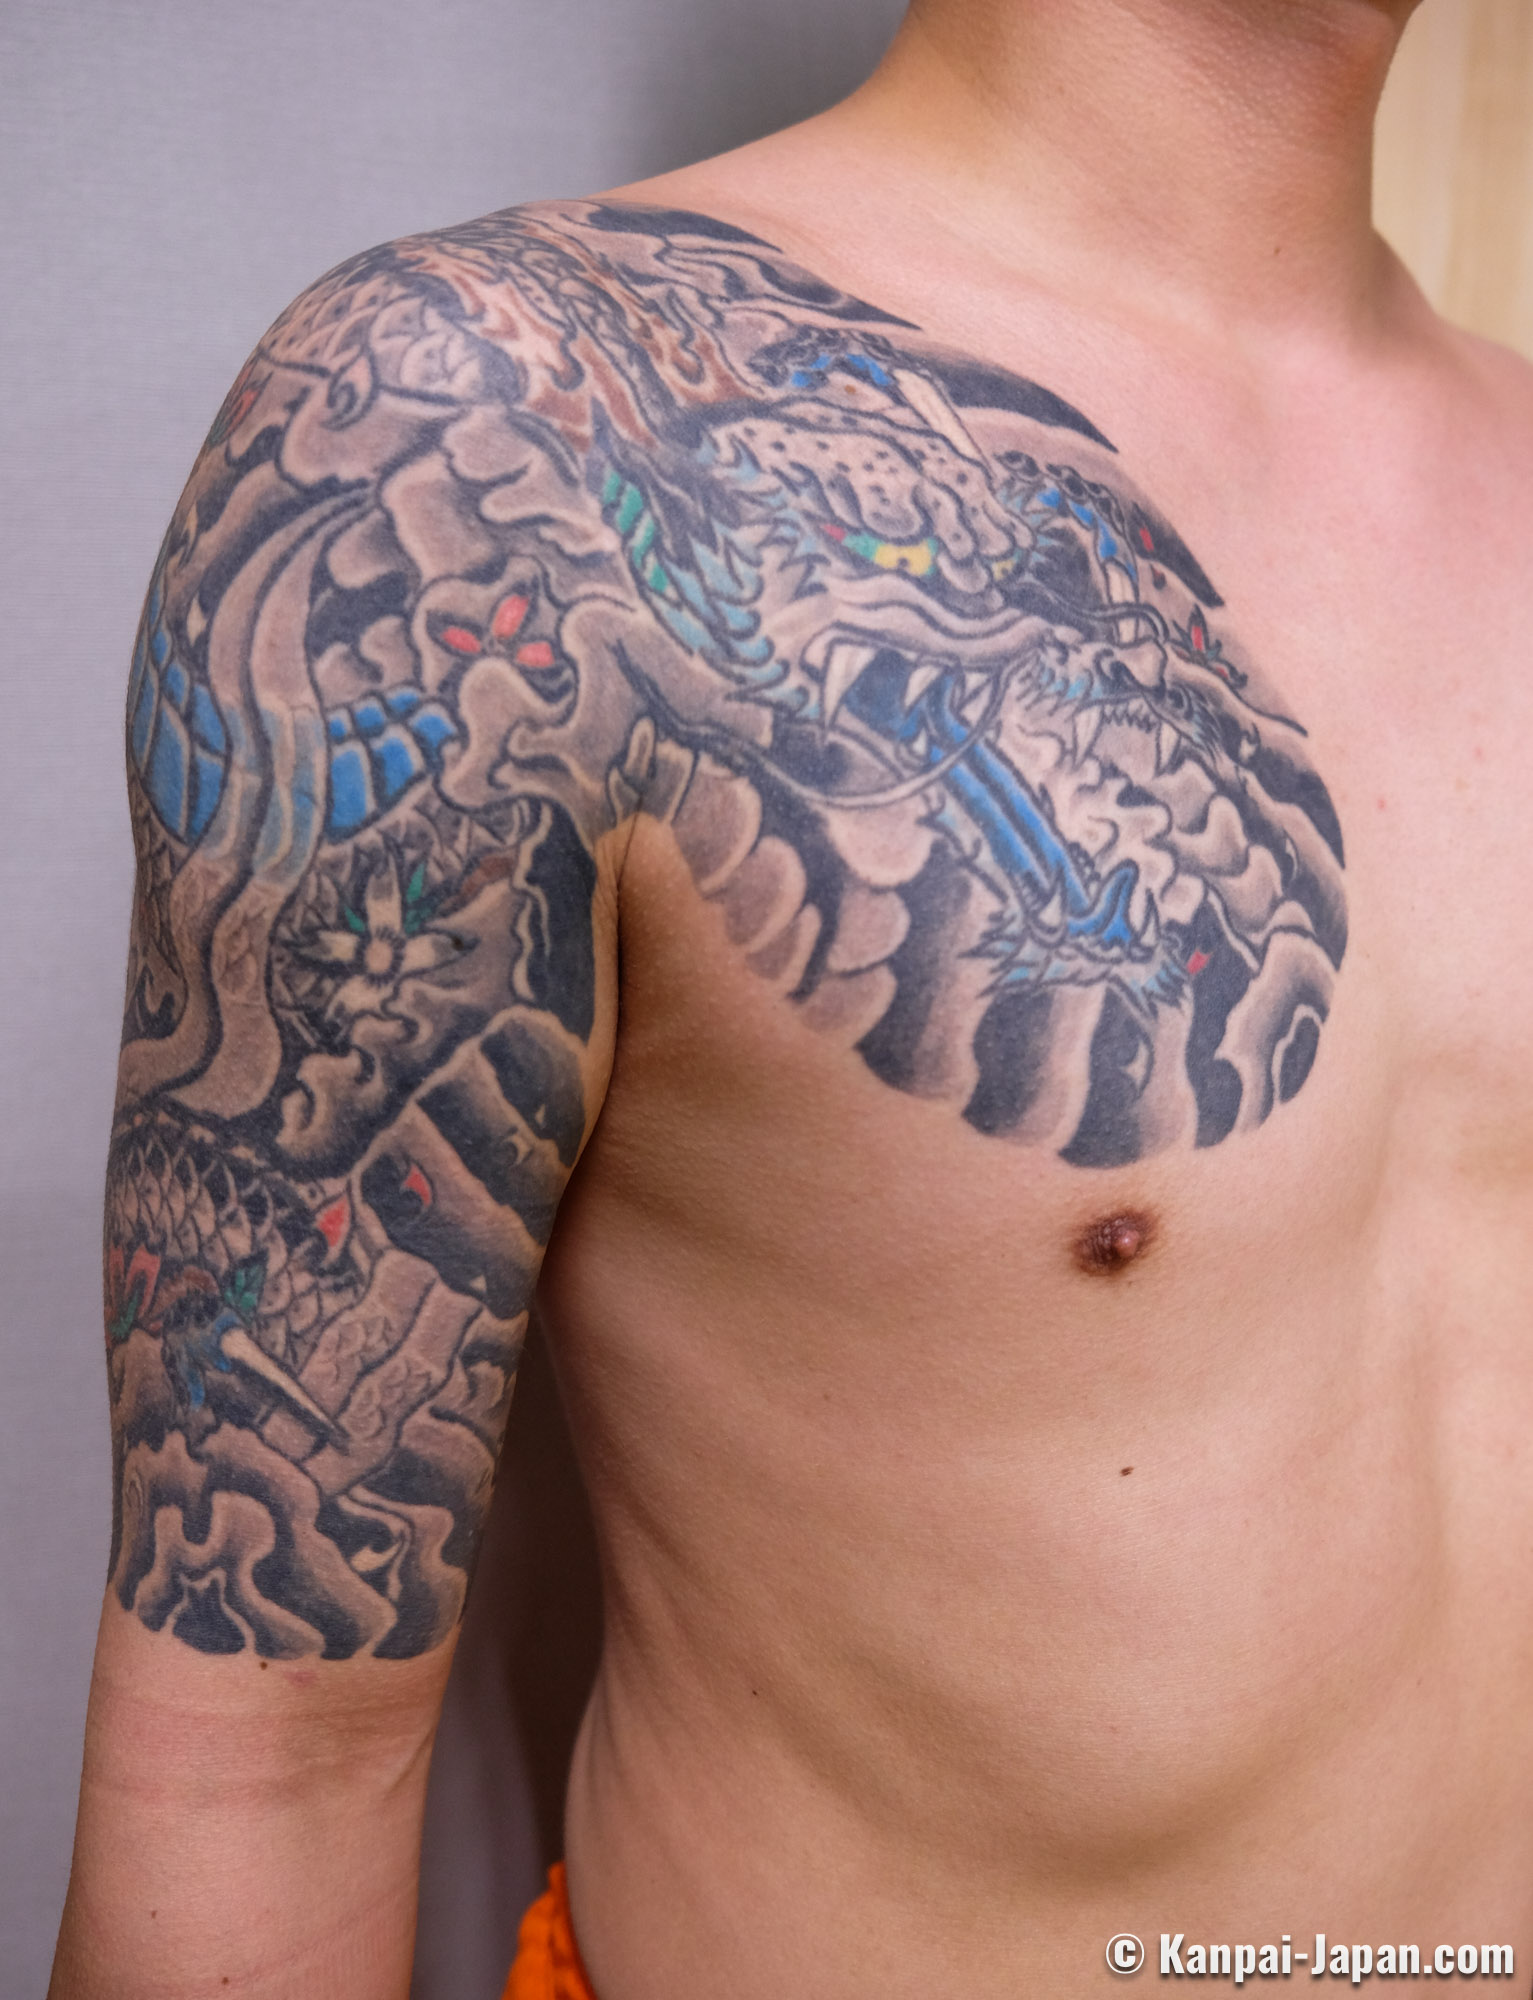 Japanese Tattoos History Culture Design The beginners guide to getting  inked in nippon  The Japan Times